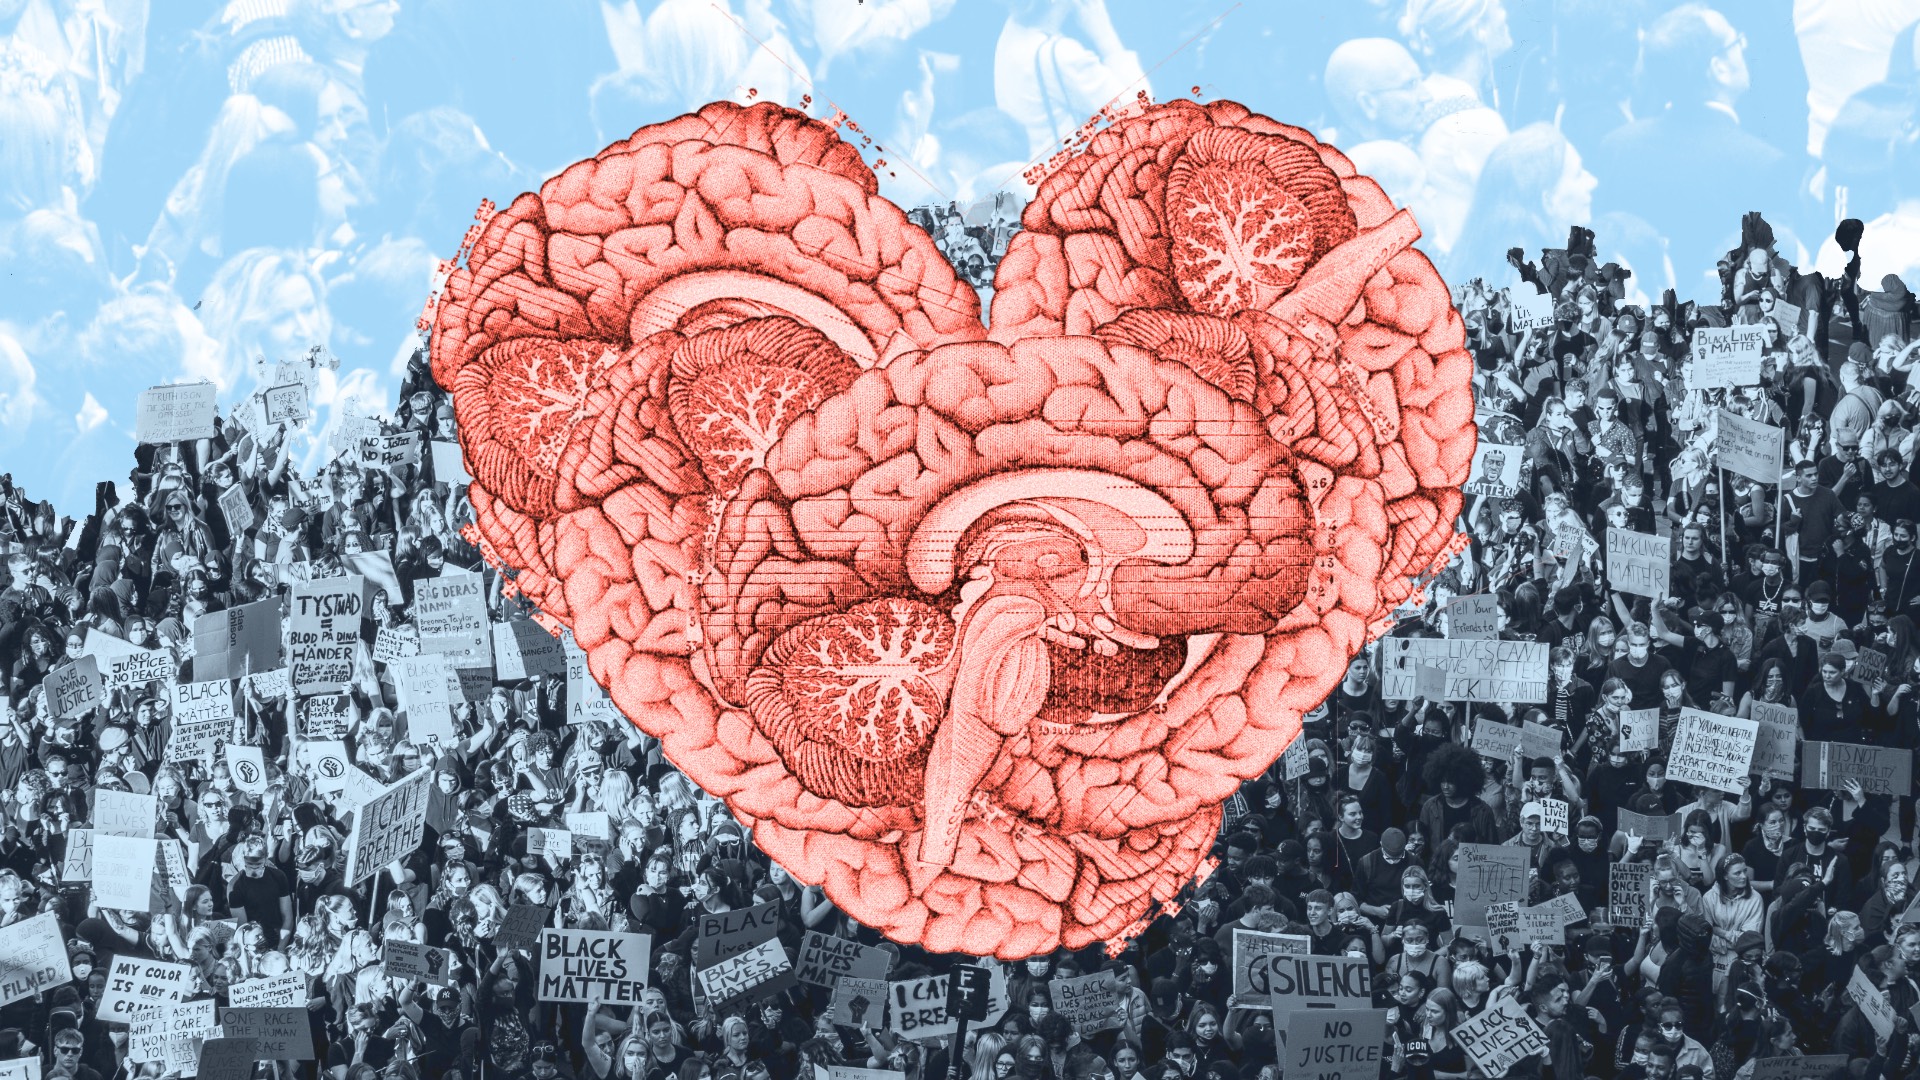 Blue and red collage of a heart shaped out of brains in front of images of protest.